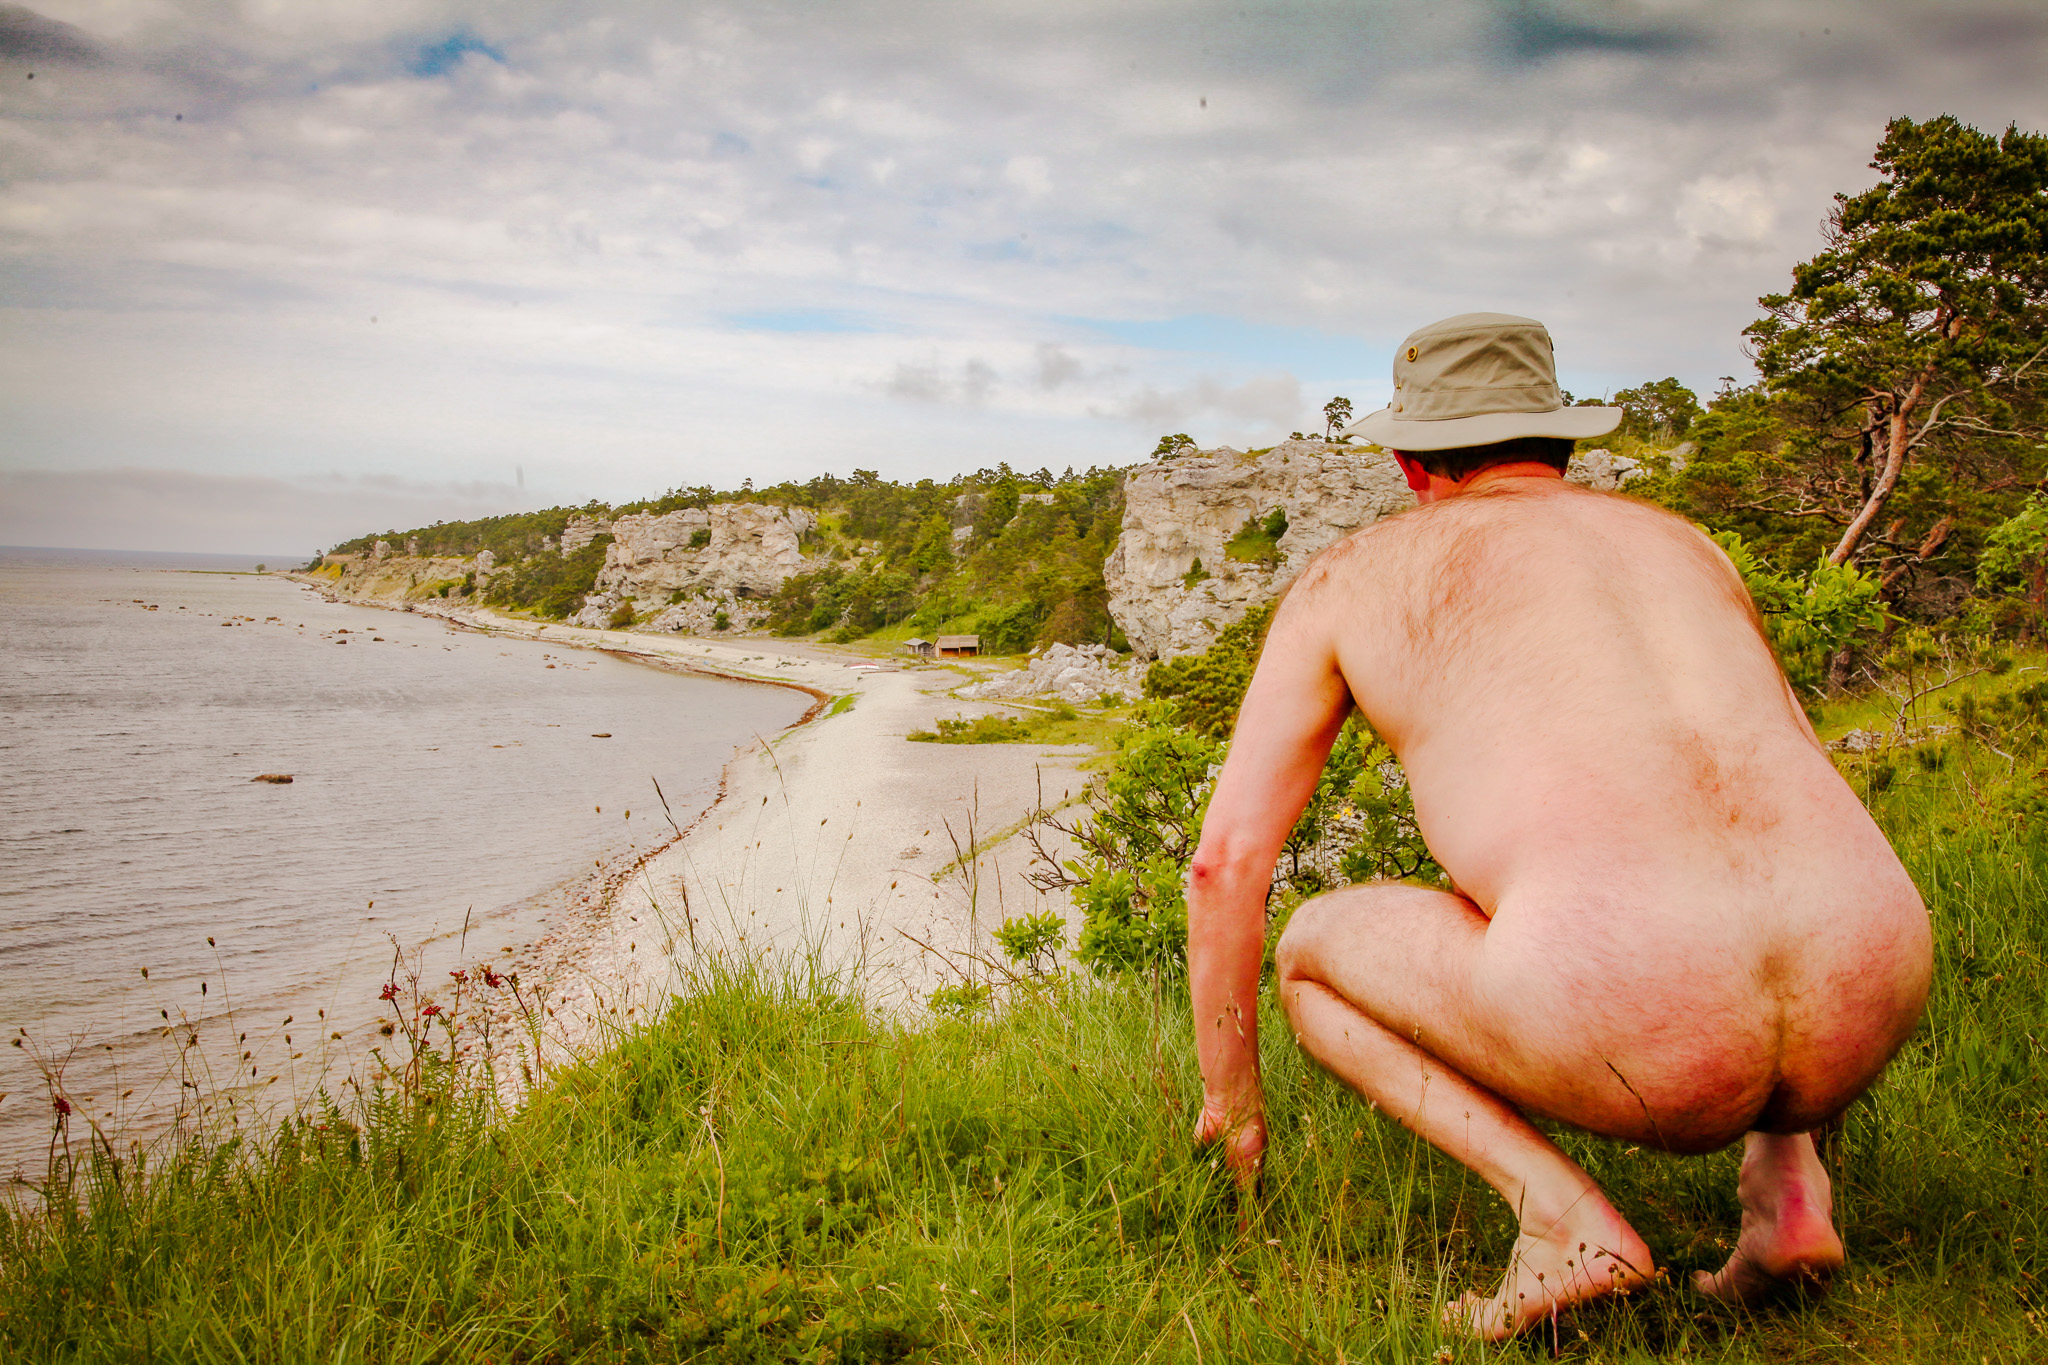 Stark naked man on Gotland showing his buttocks